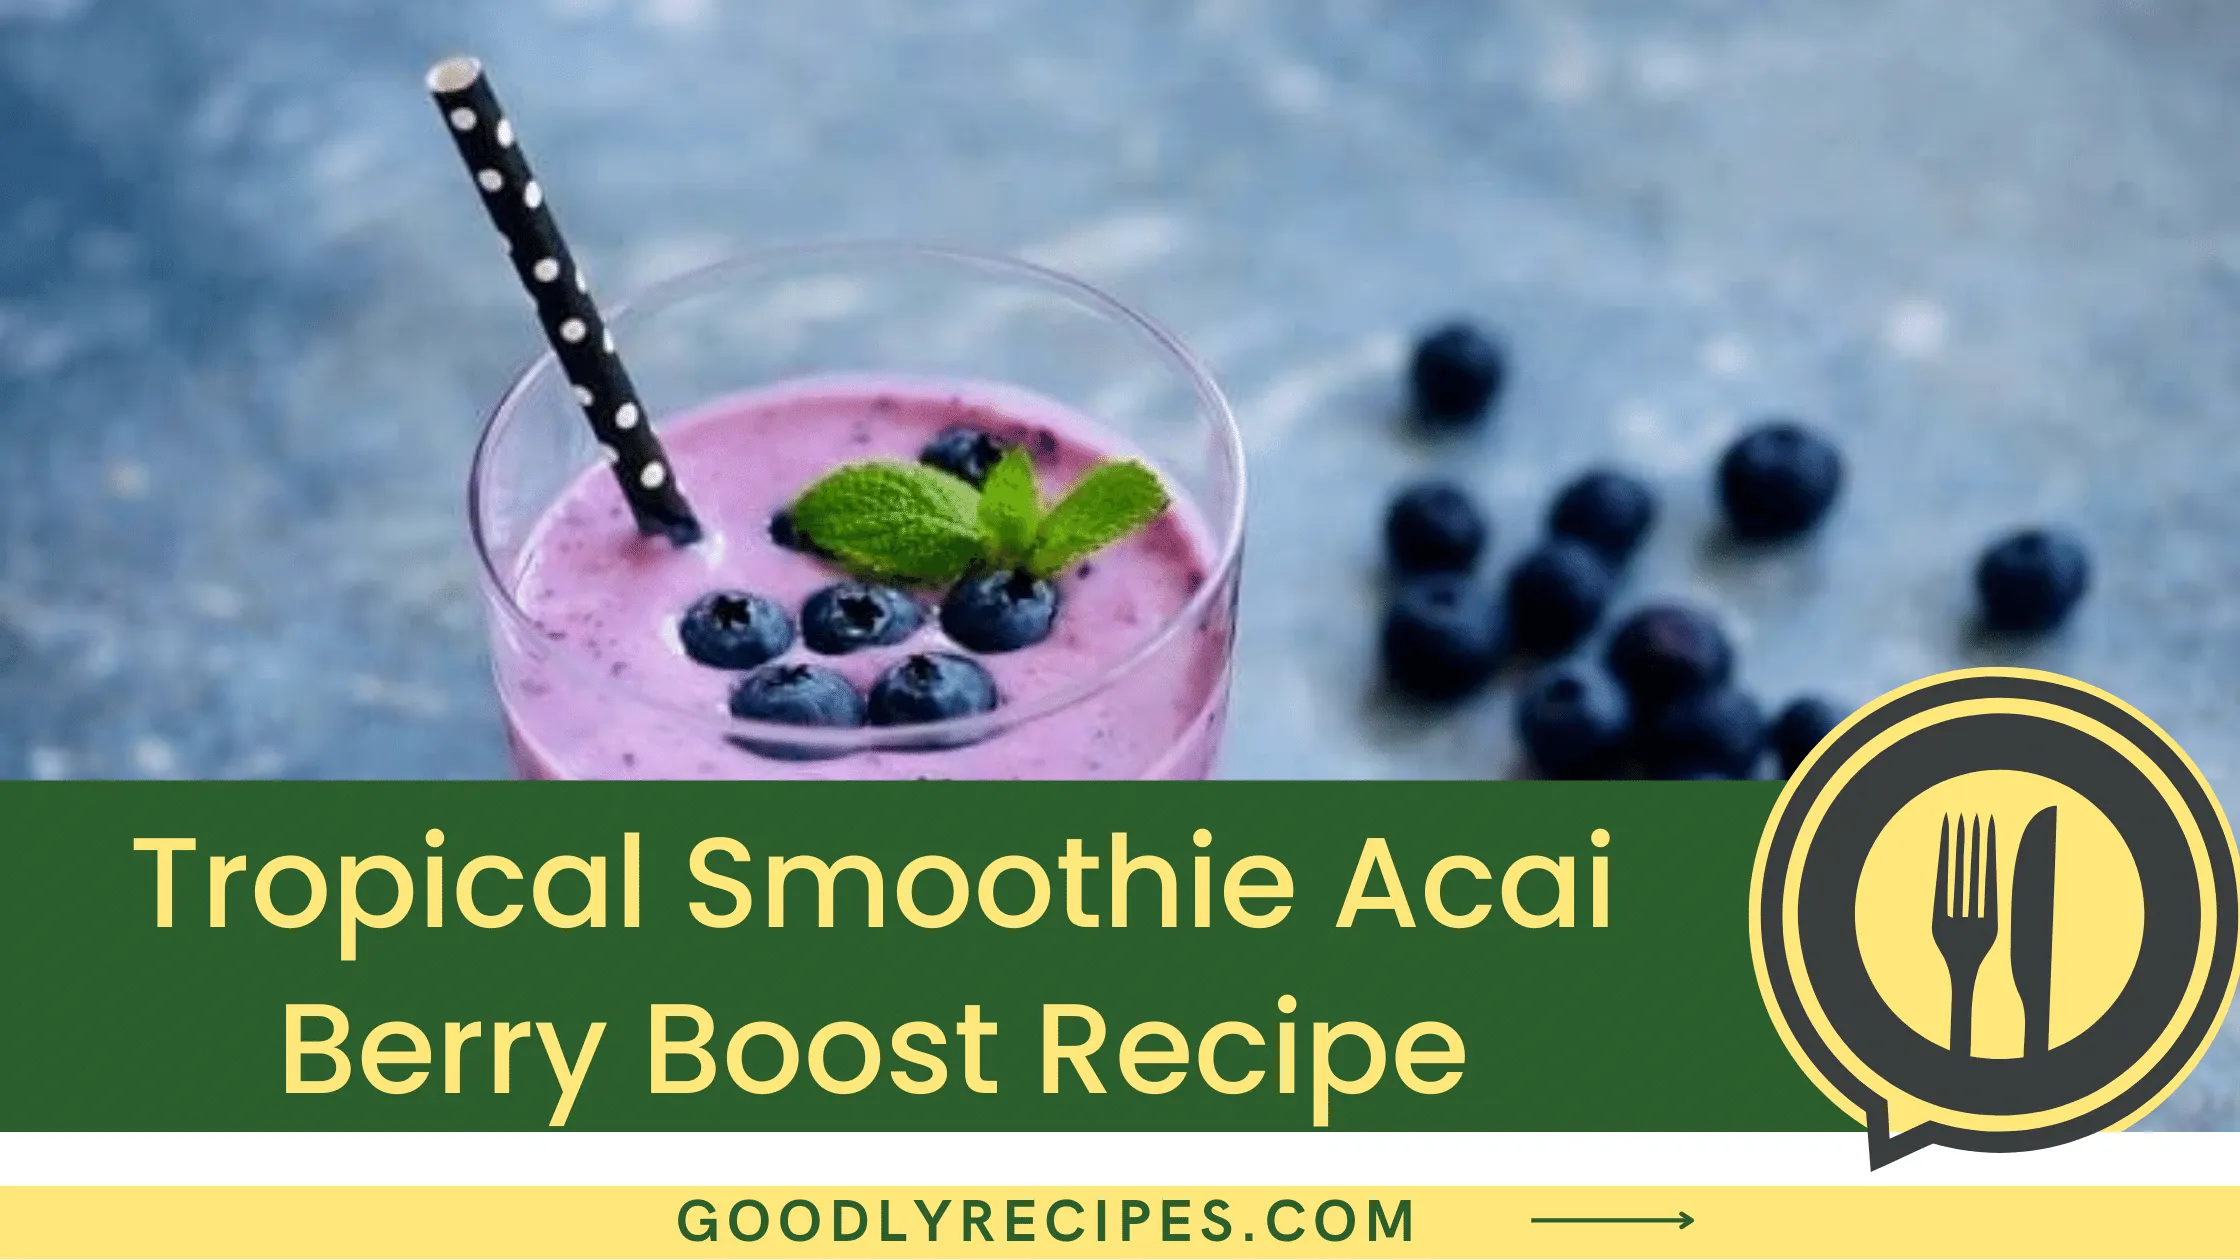 Tropical Smoothie Acai Berry Boost Recipe - For Food Lovers